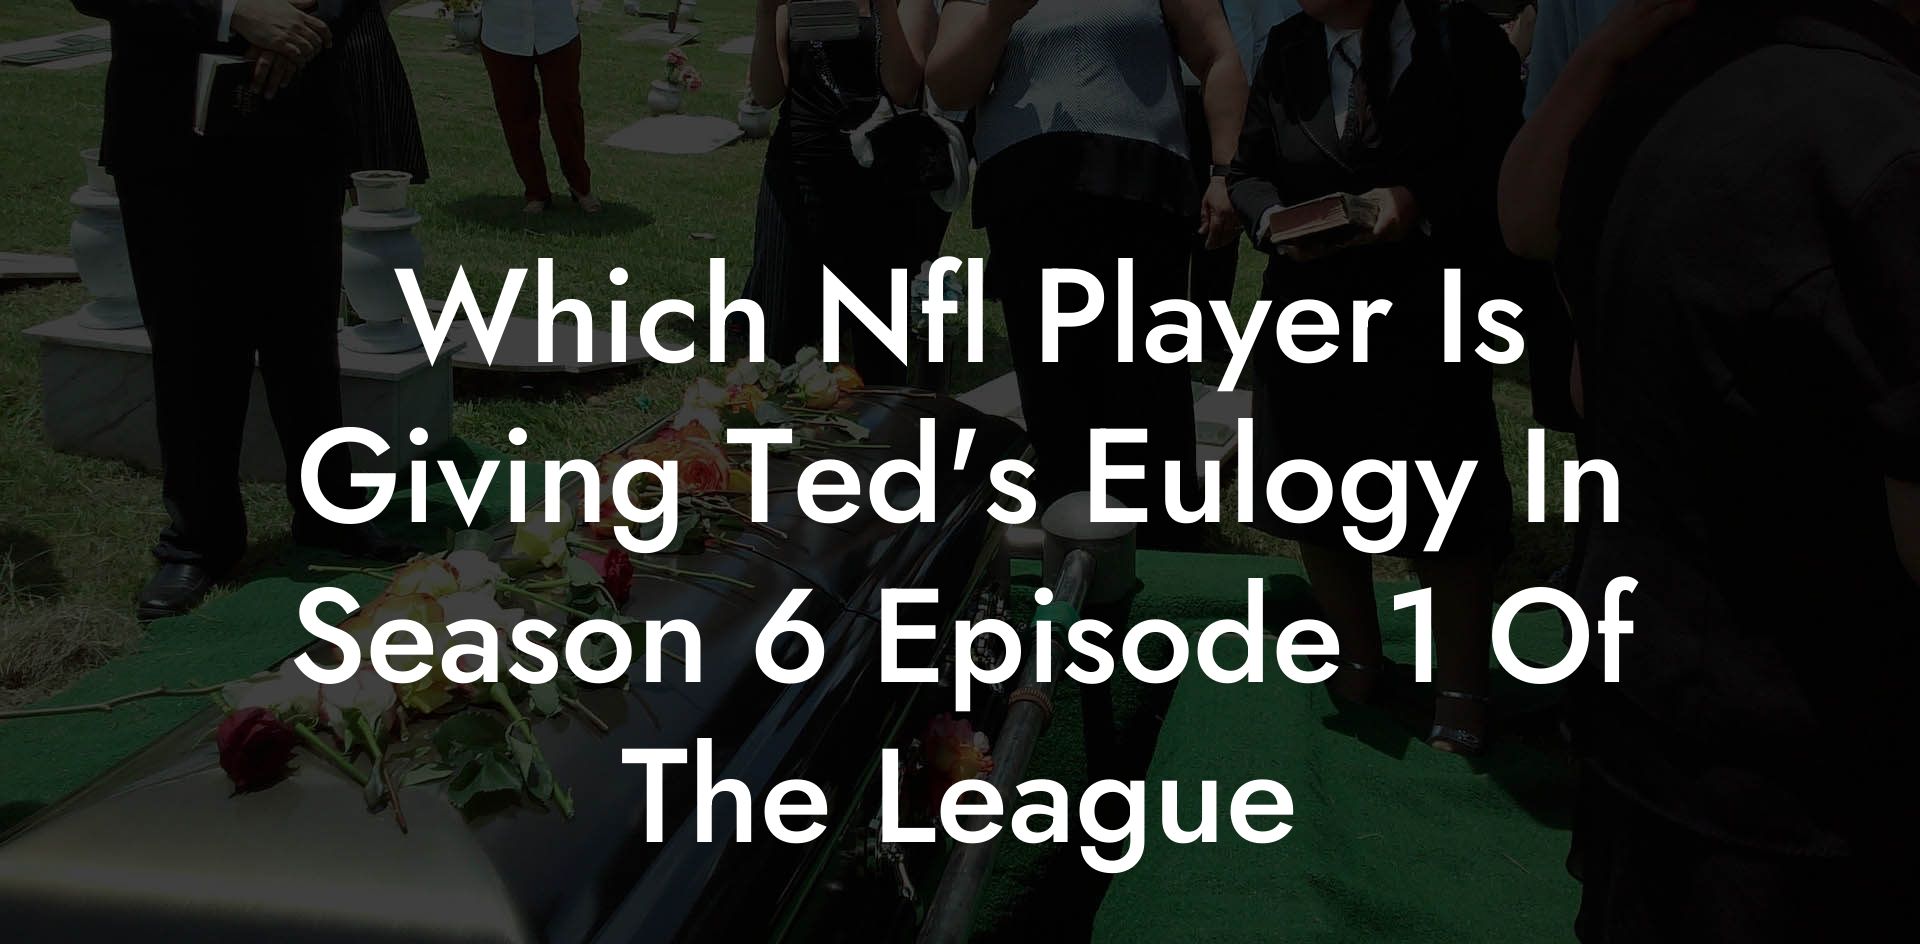 Which Nfl Player Is Giving Ted's Eulogy In Season 6 Episode 1 Of The League